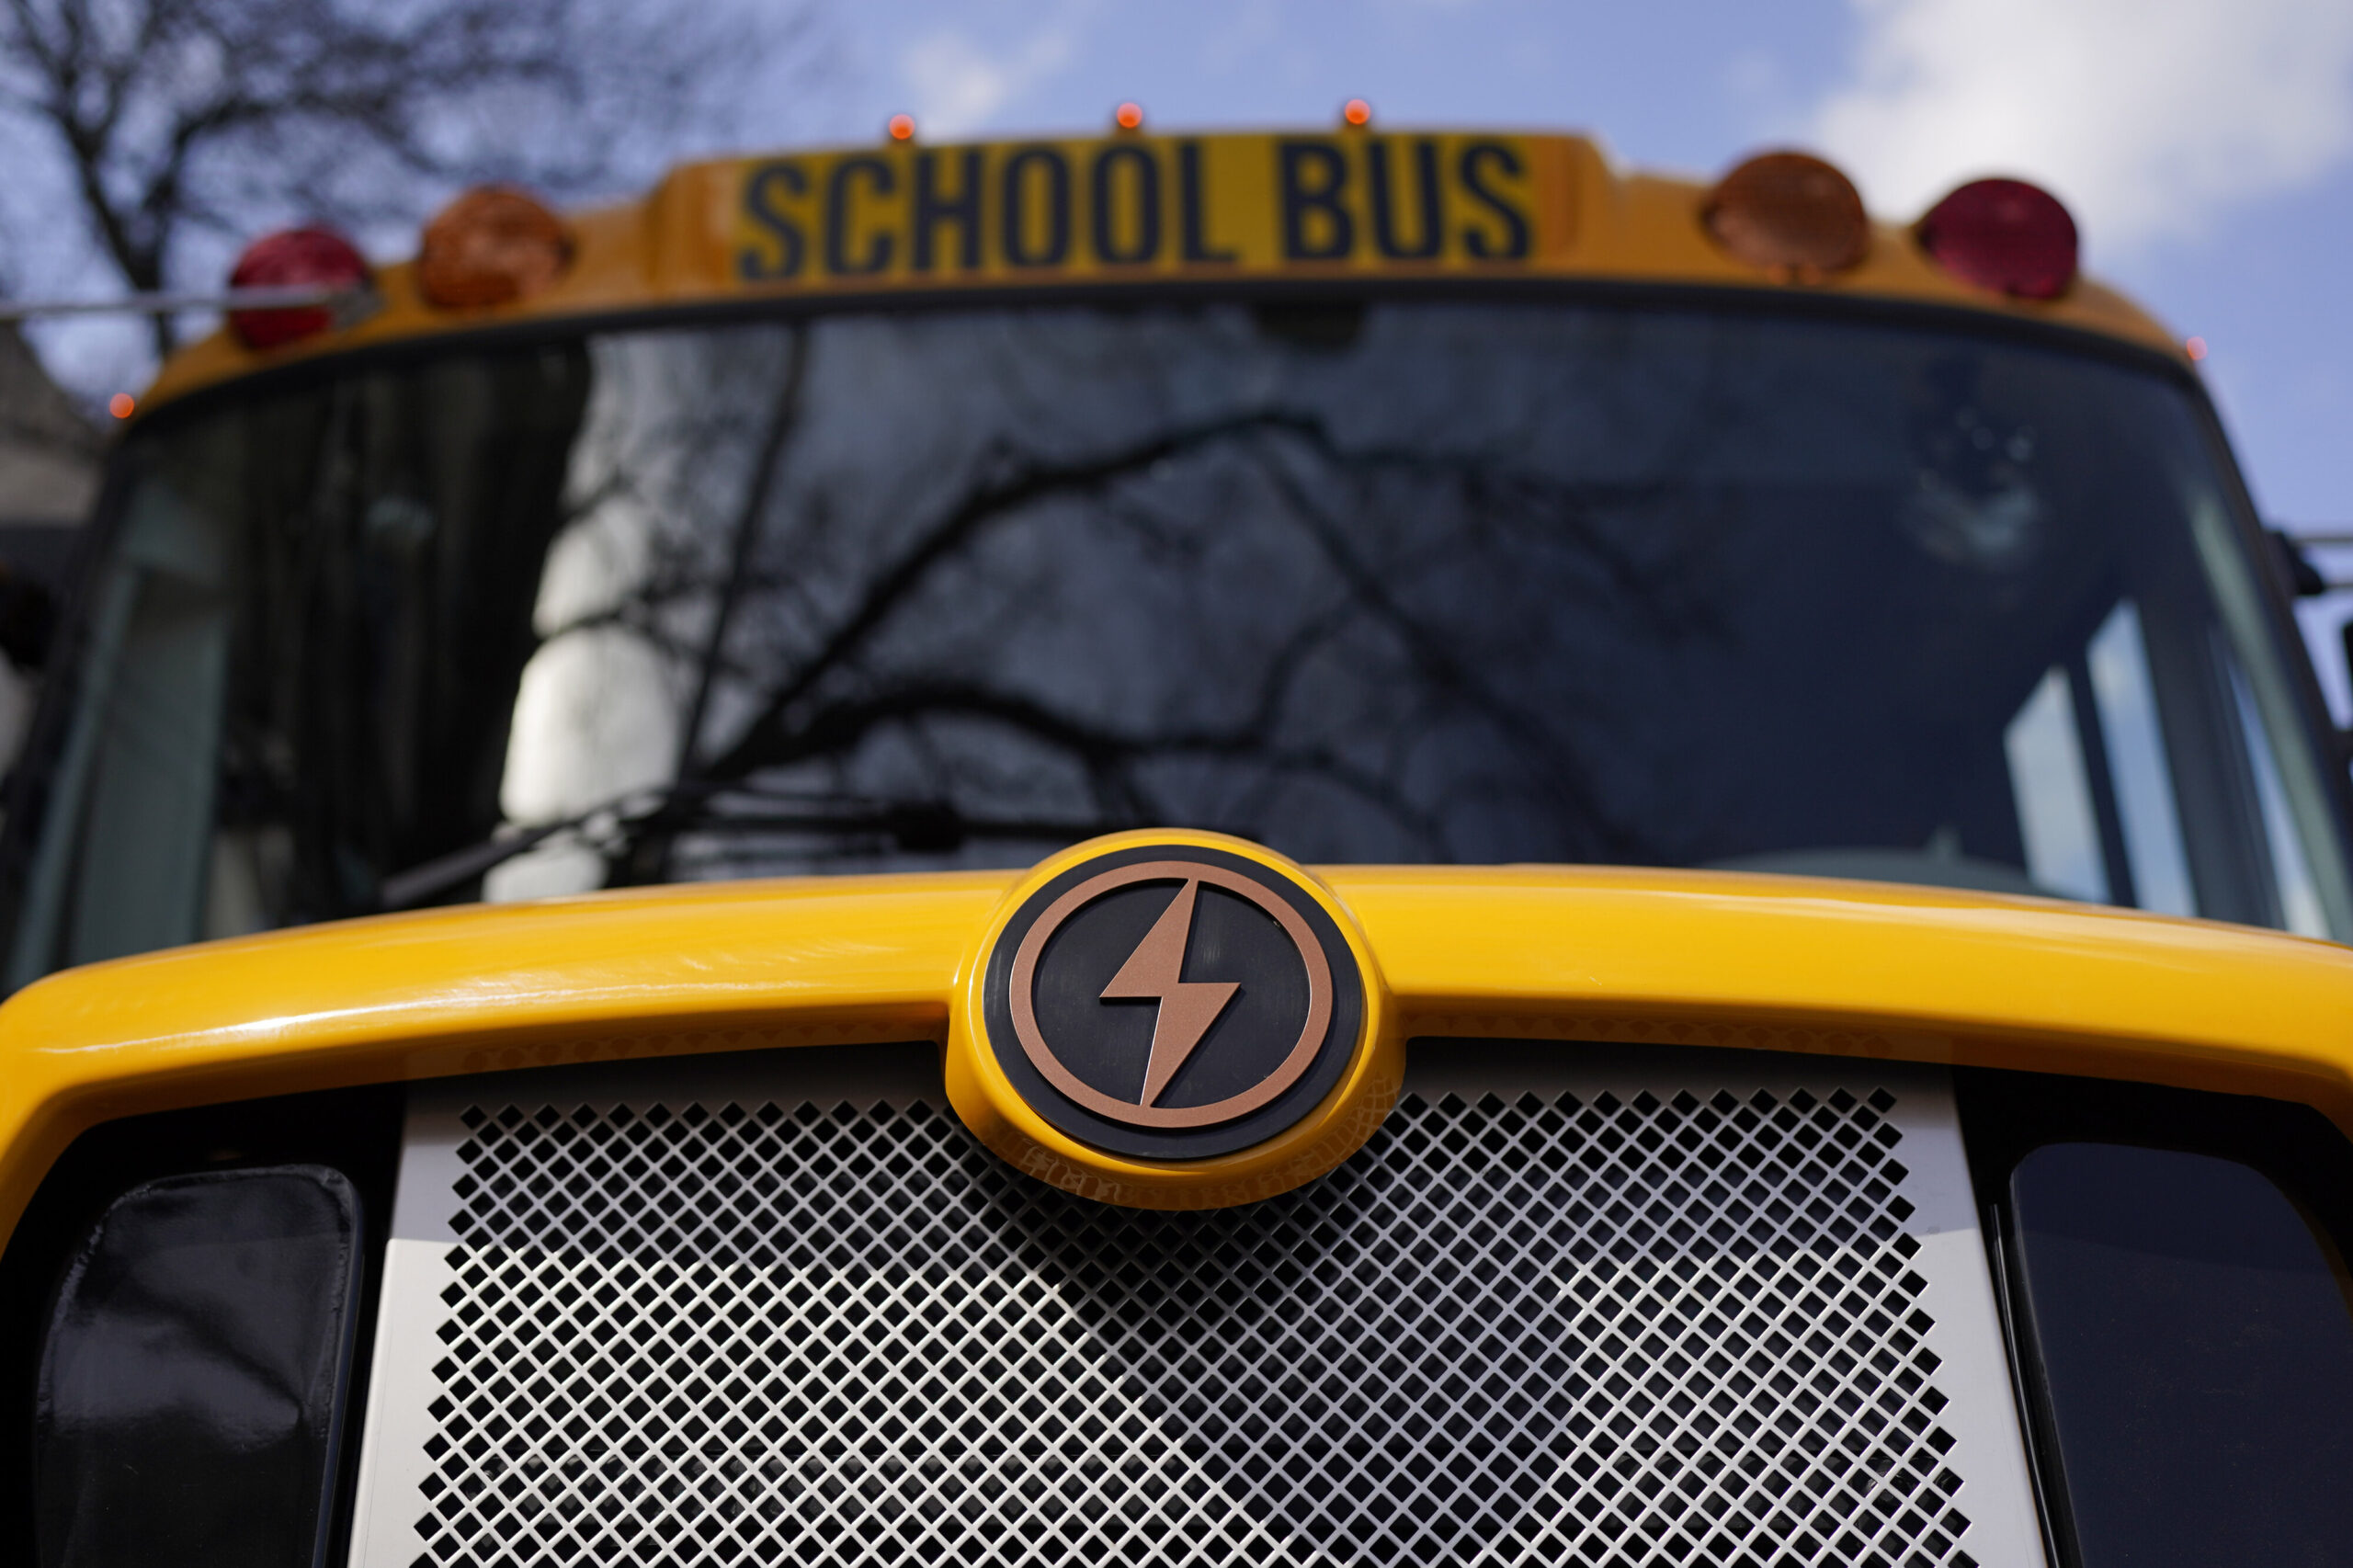 The front of an electric school bus is shown with its lightning bolt logo